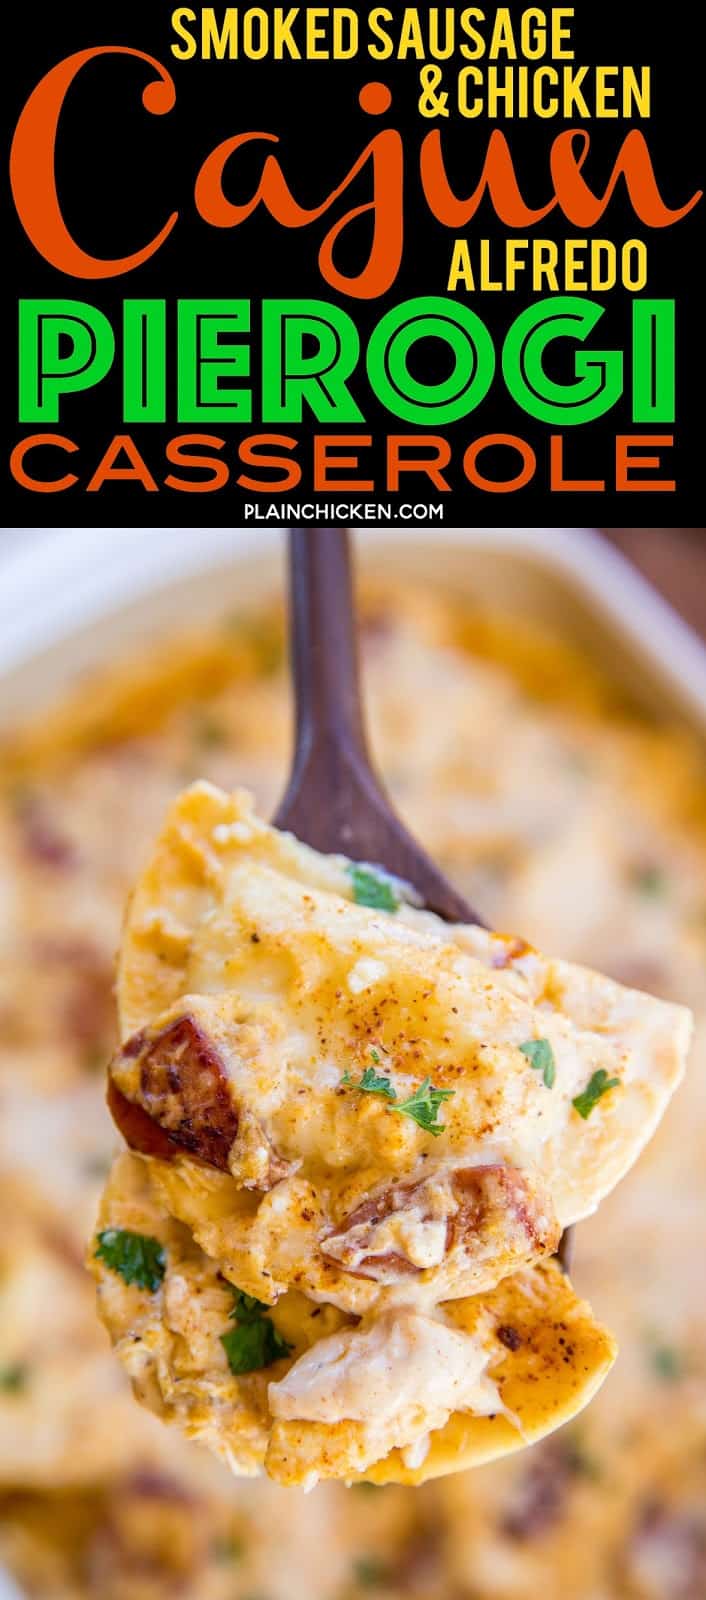 Smoked Sausage & Chicken Cajun Alfredo Pierogi Casserole - this is AMAZING!!! Super easy to make and everyone RAVES about it. Only 6 ingredients - smoked sausage, chicken, Alfredo sauce, cajun seasoning, pieorgies and parmesan cheese. Can make ahead of time and refrigerate or freeze for later. Perfect for any Mardi Gras celebrations! #casserole #mardigras #cajun #freezermeal #chickencasserole